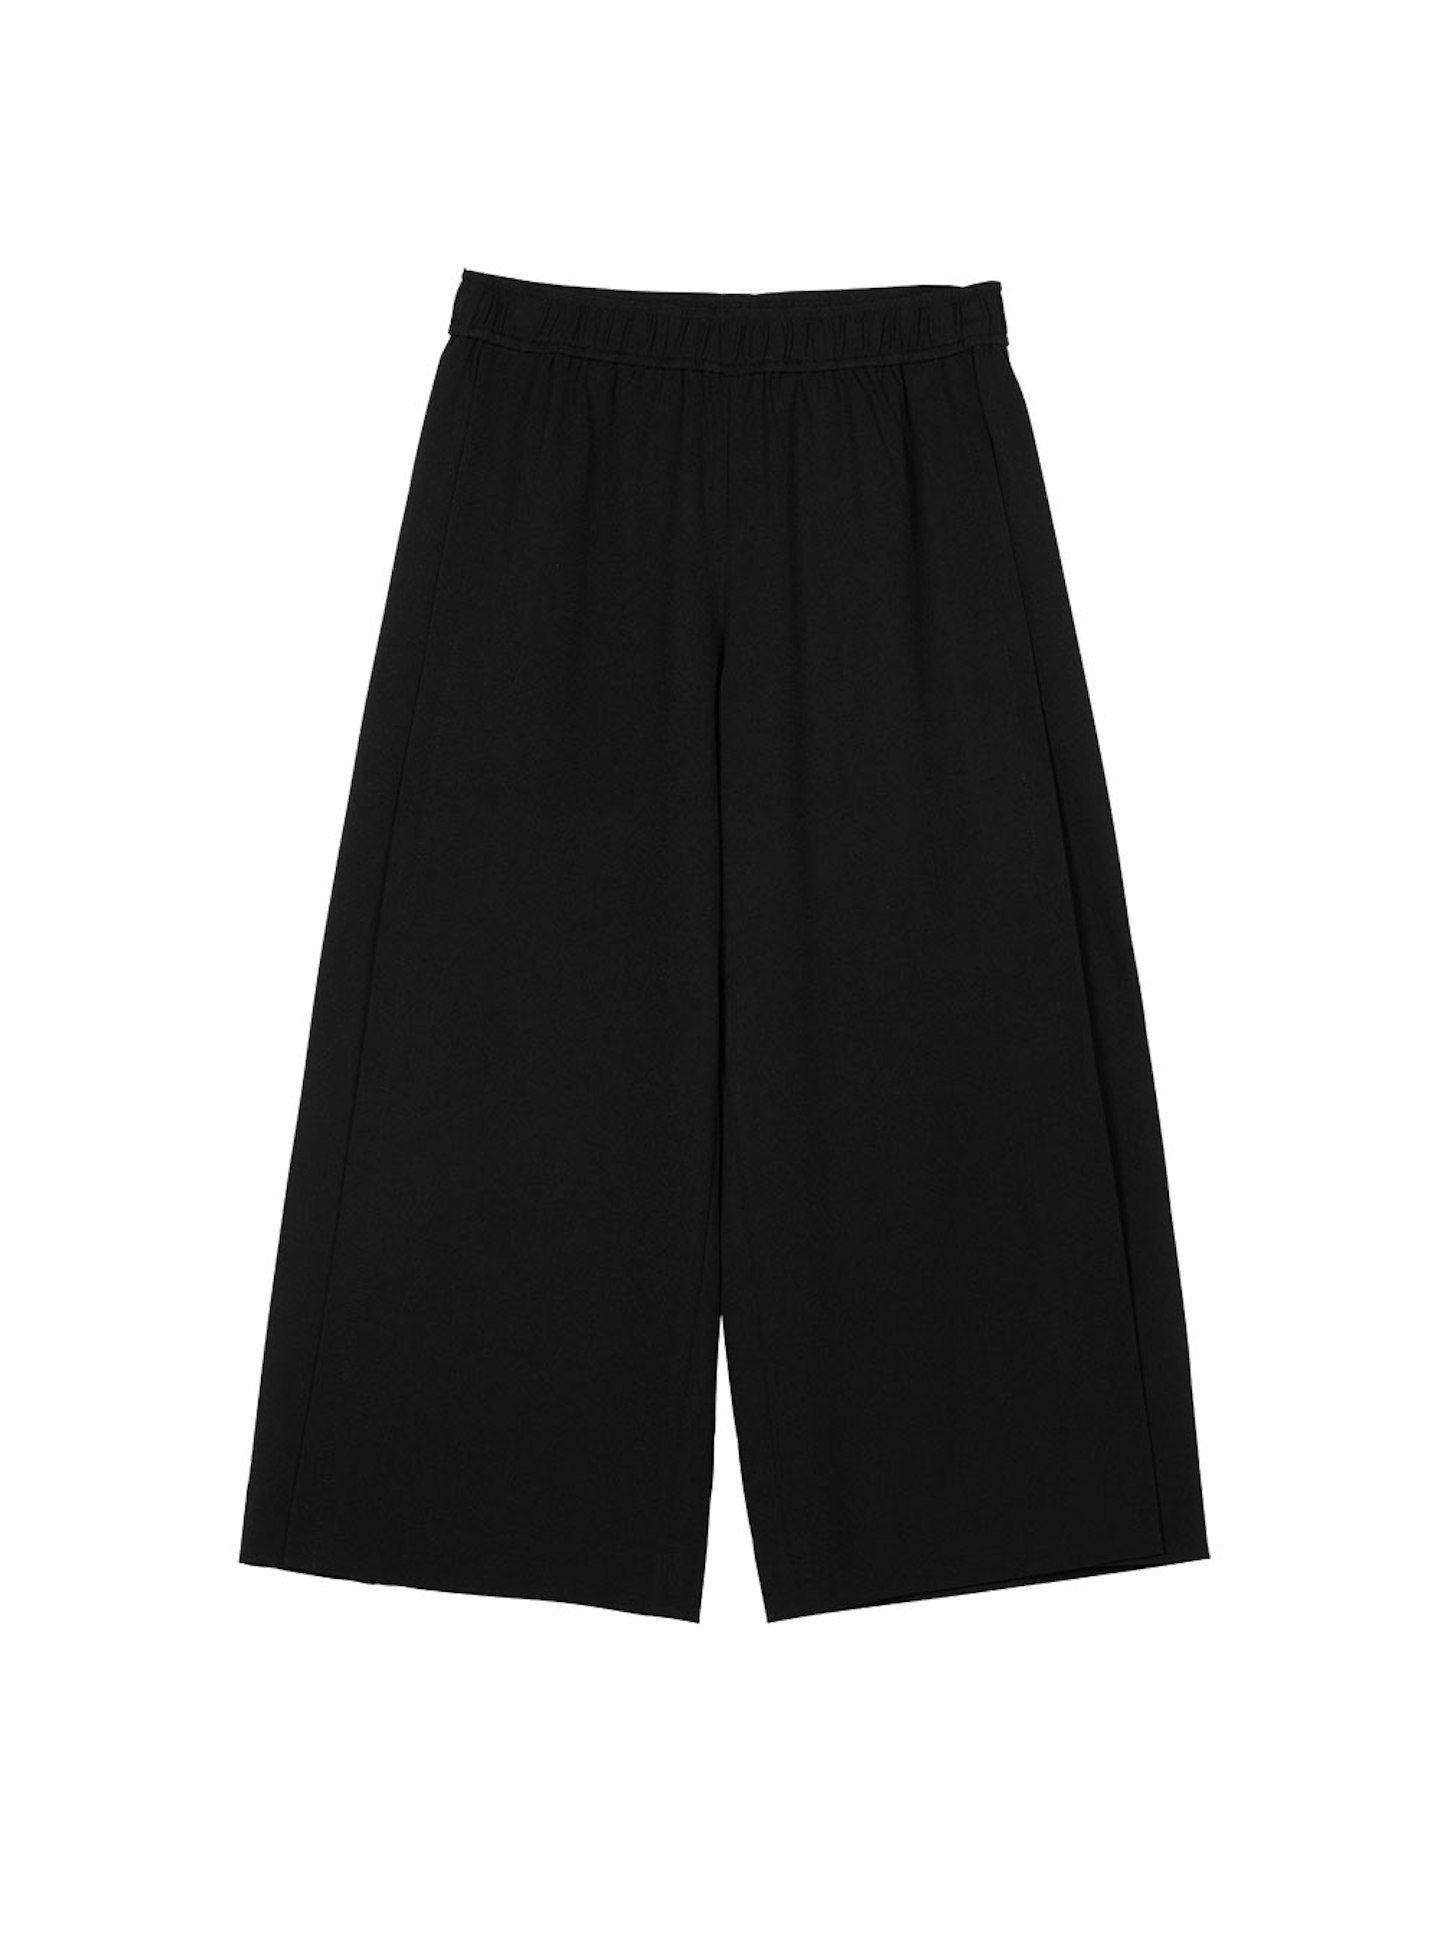 hush-culottes-airport-style